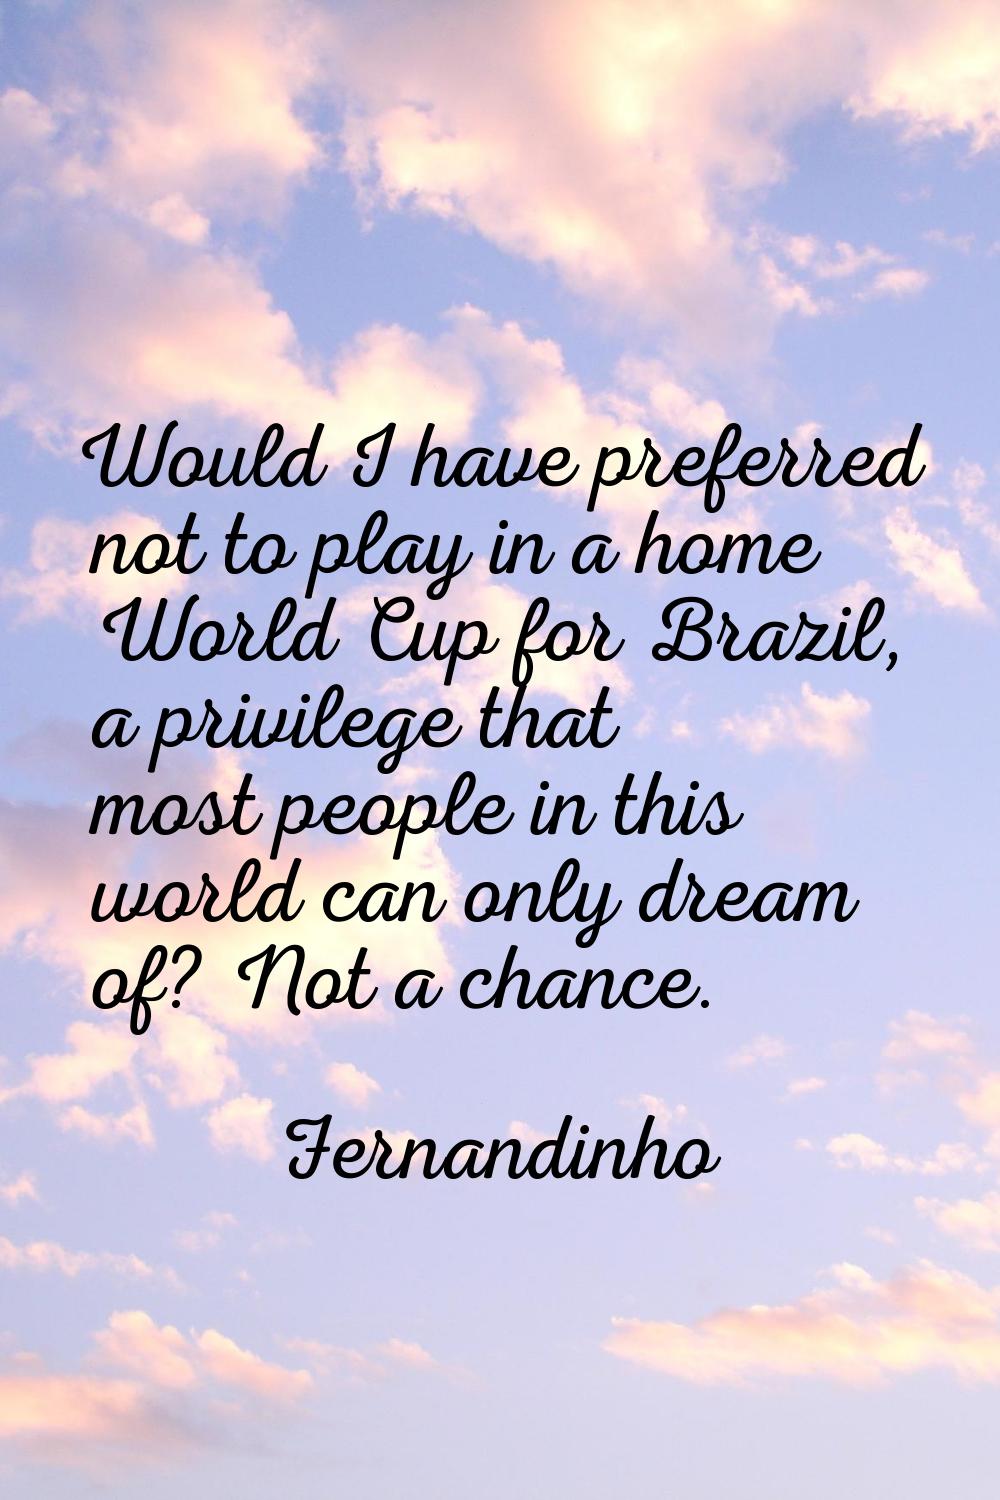 Would I have preferred not to play in a home World Cup for Brazil, a privilege that most people in 